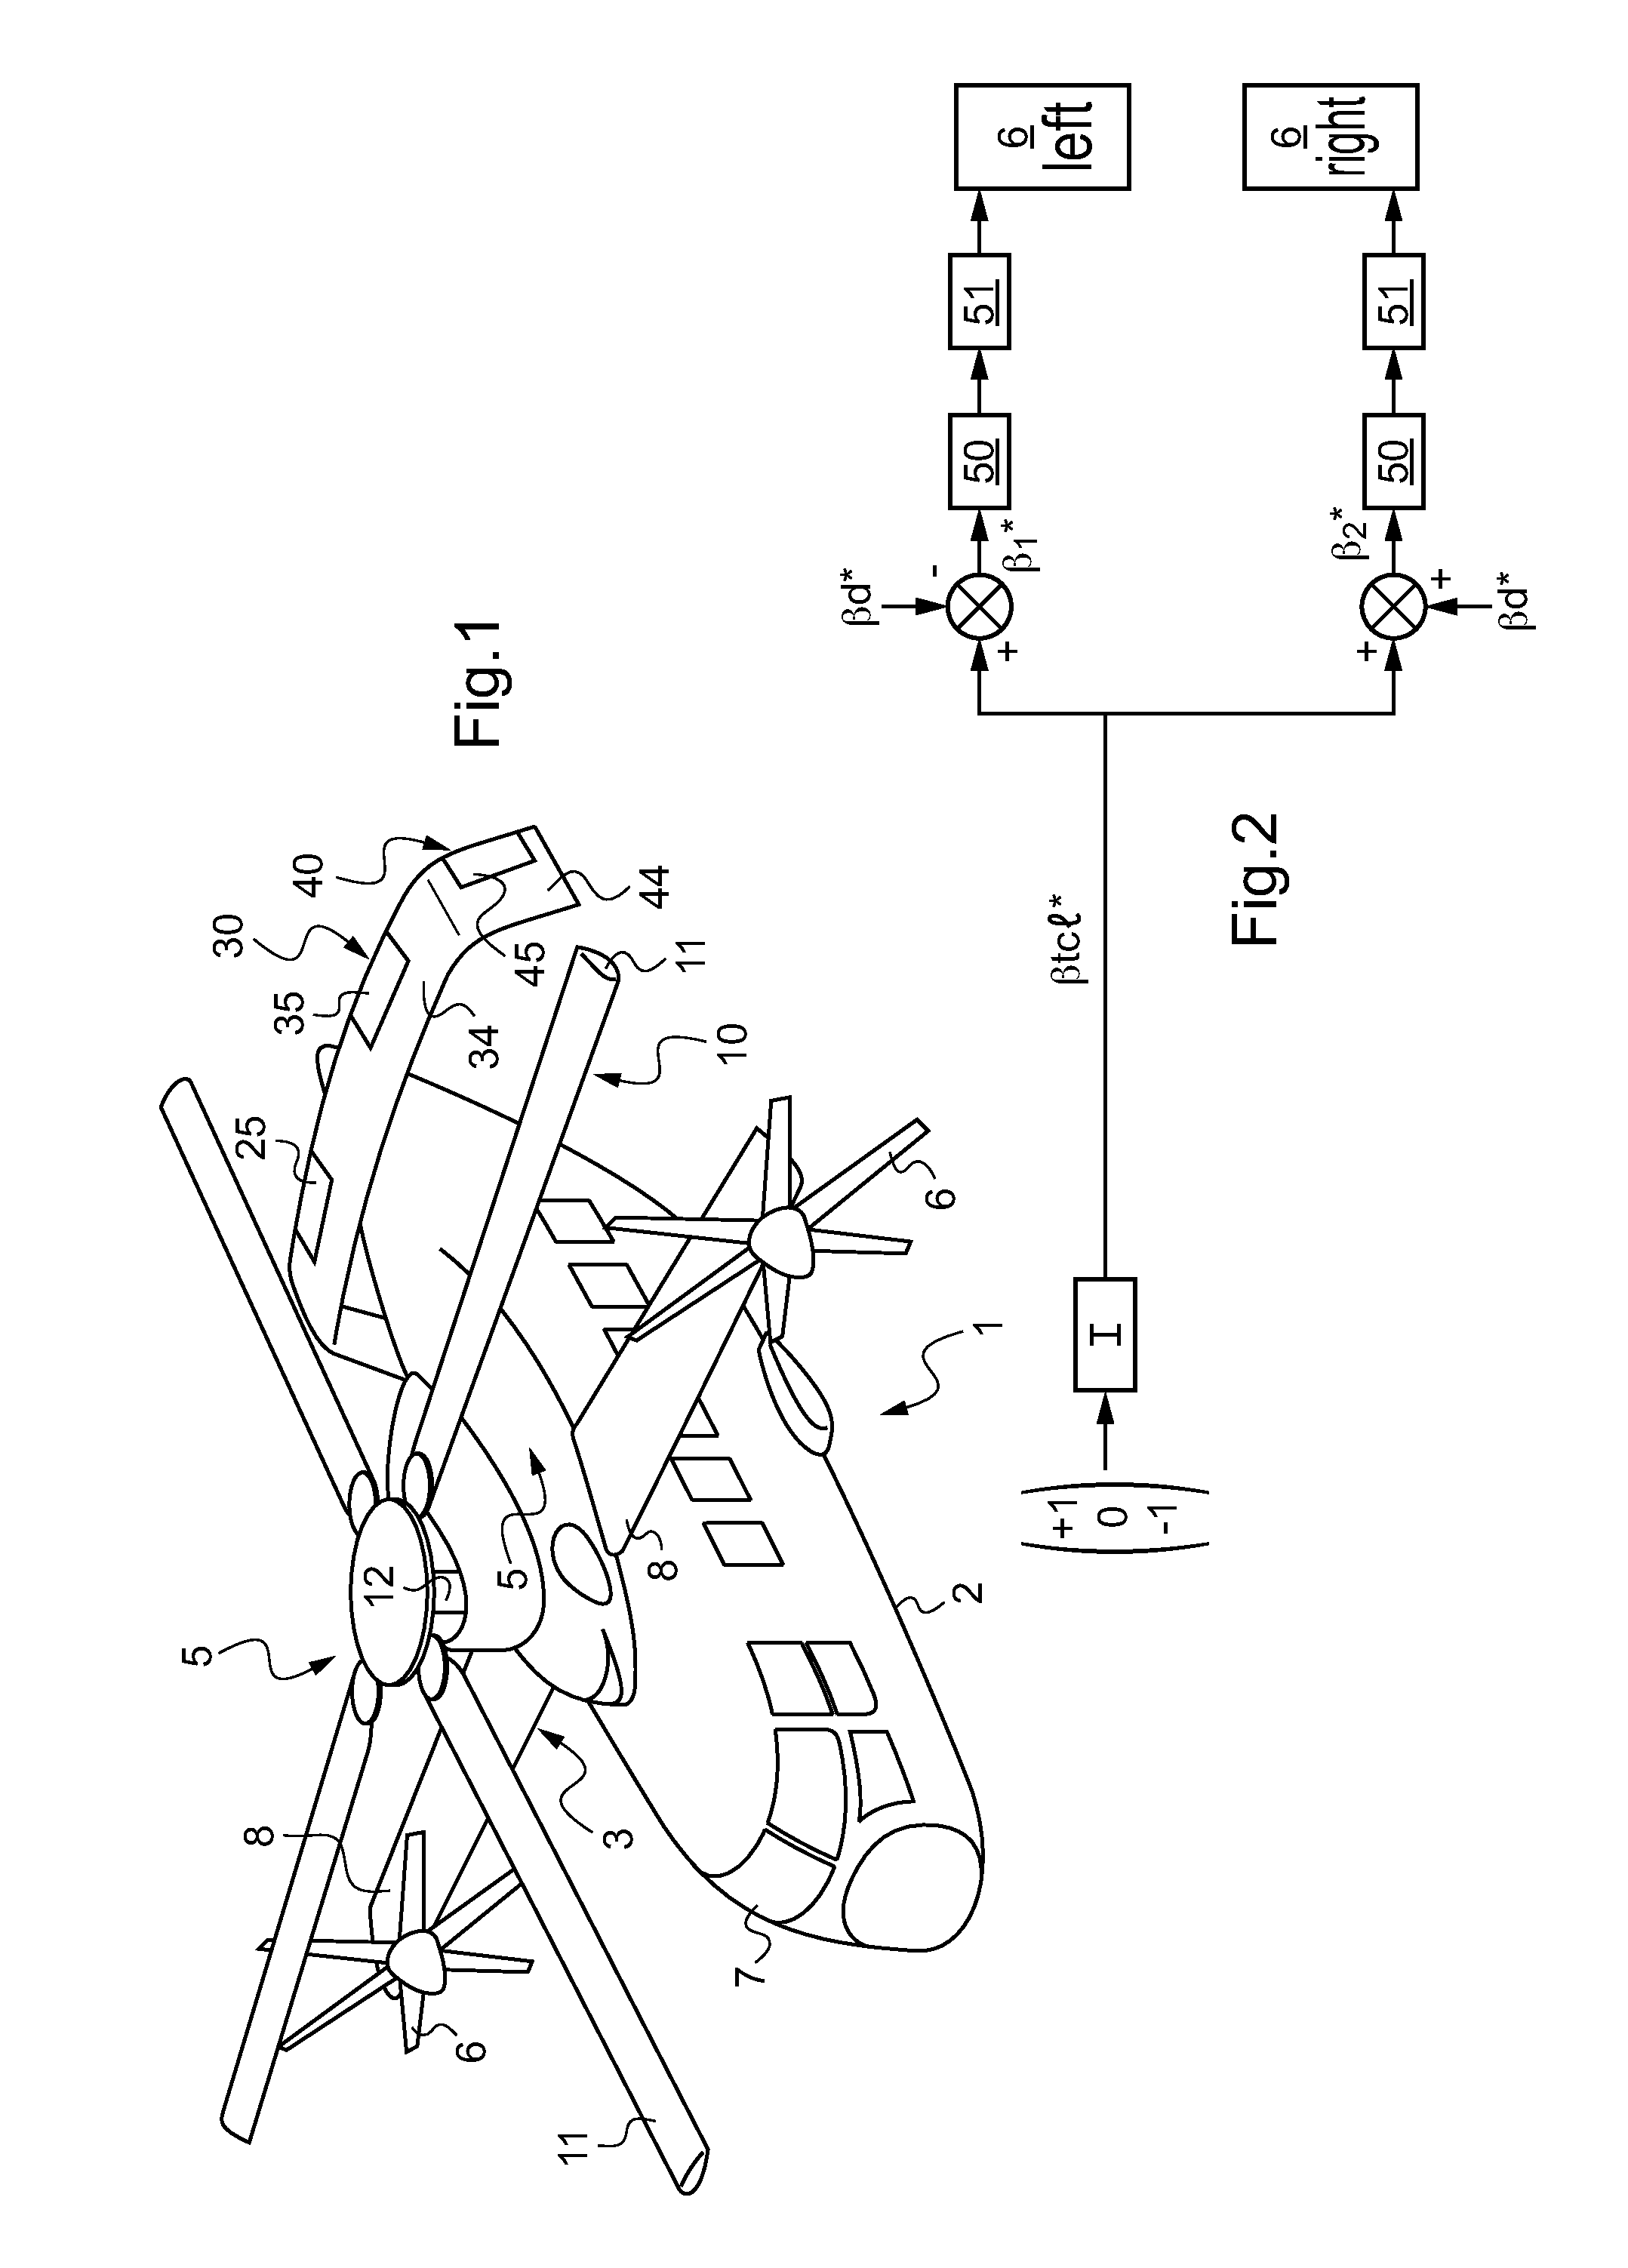 Drive control and regulation method and system for a hybrid helicopter